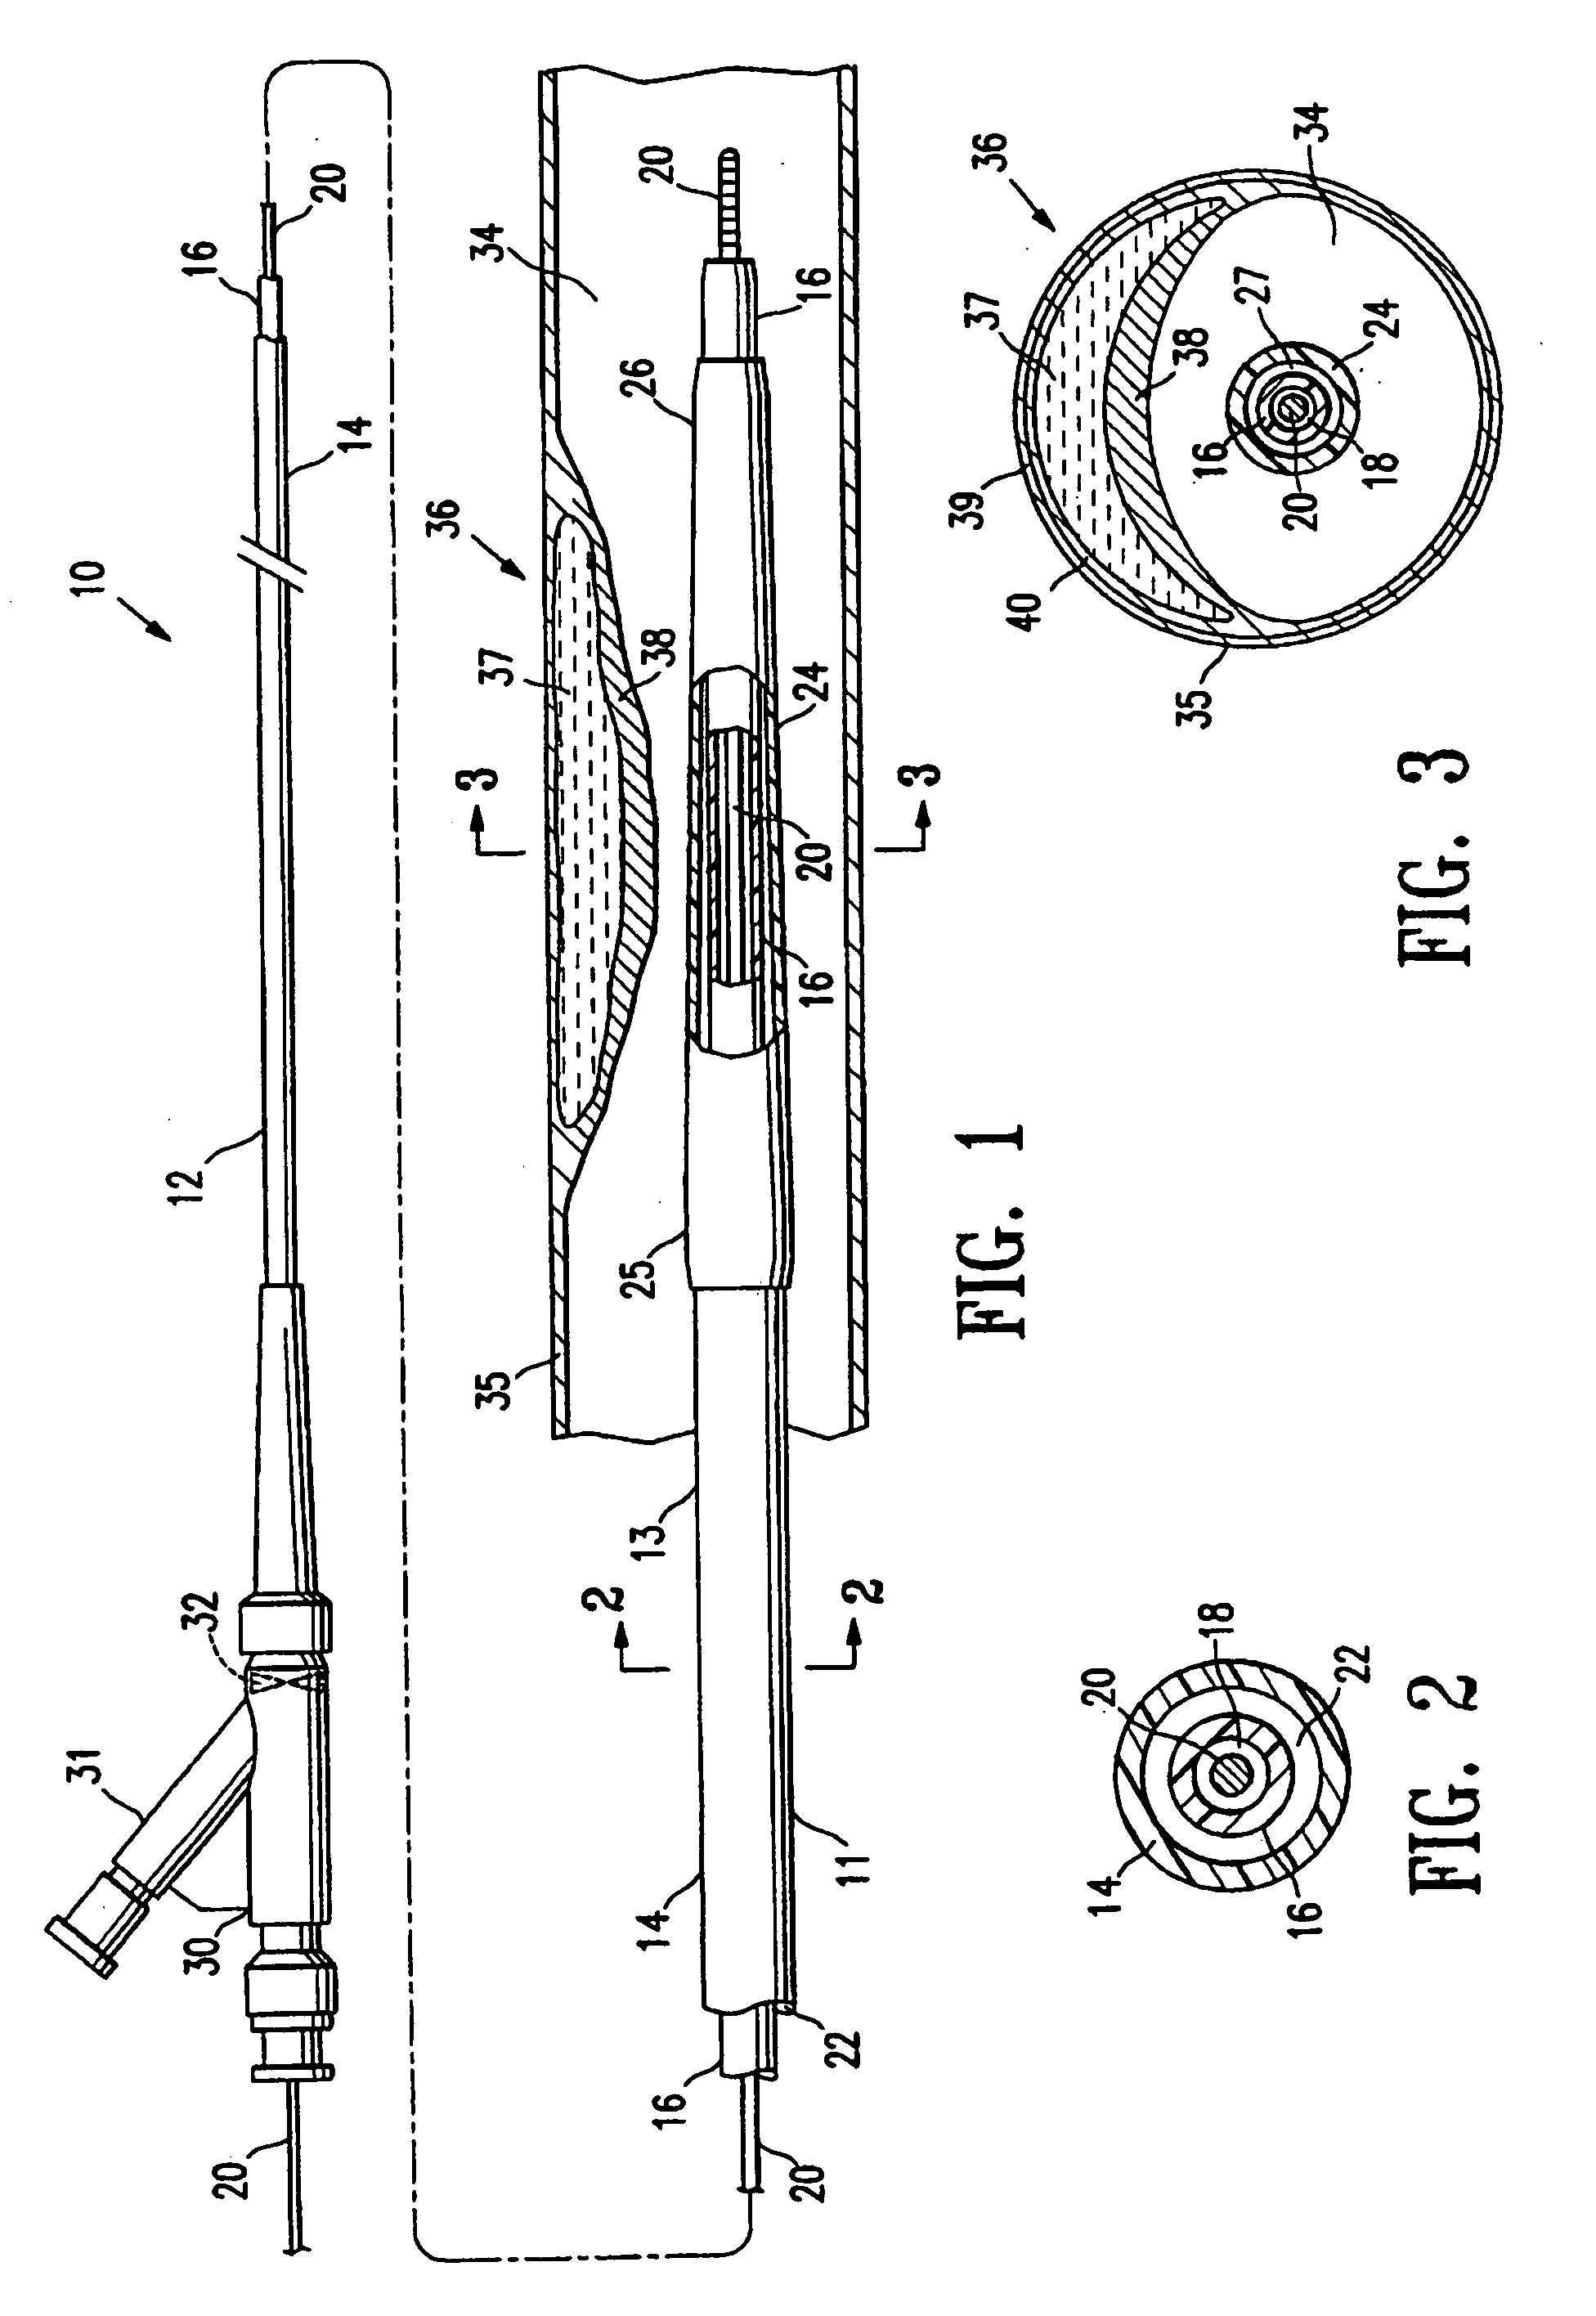 Device for treating vulnerable plaque